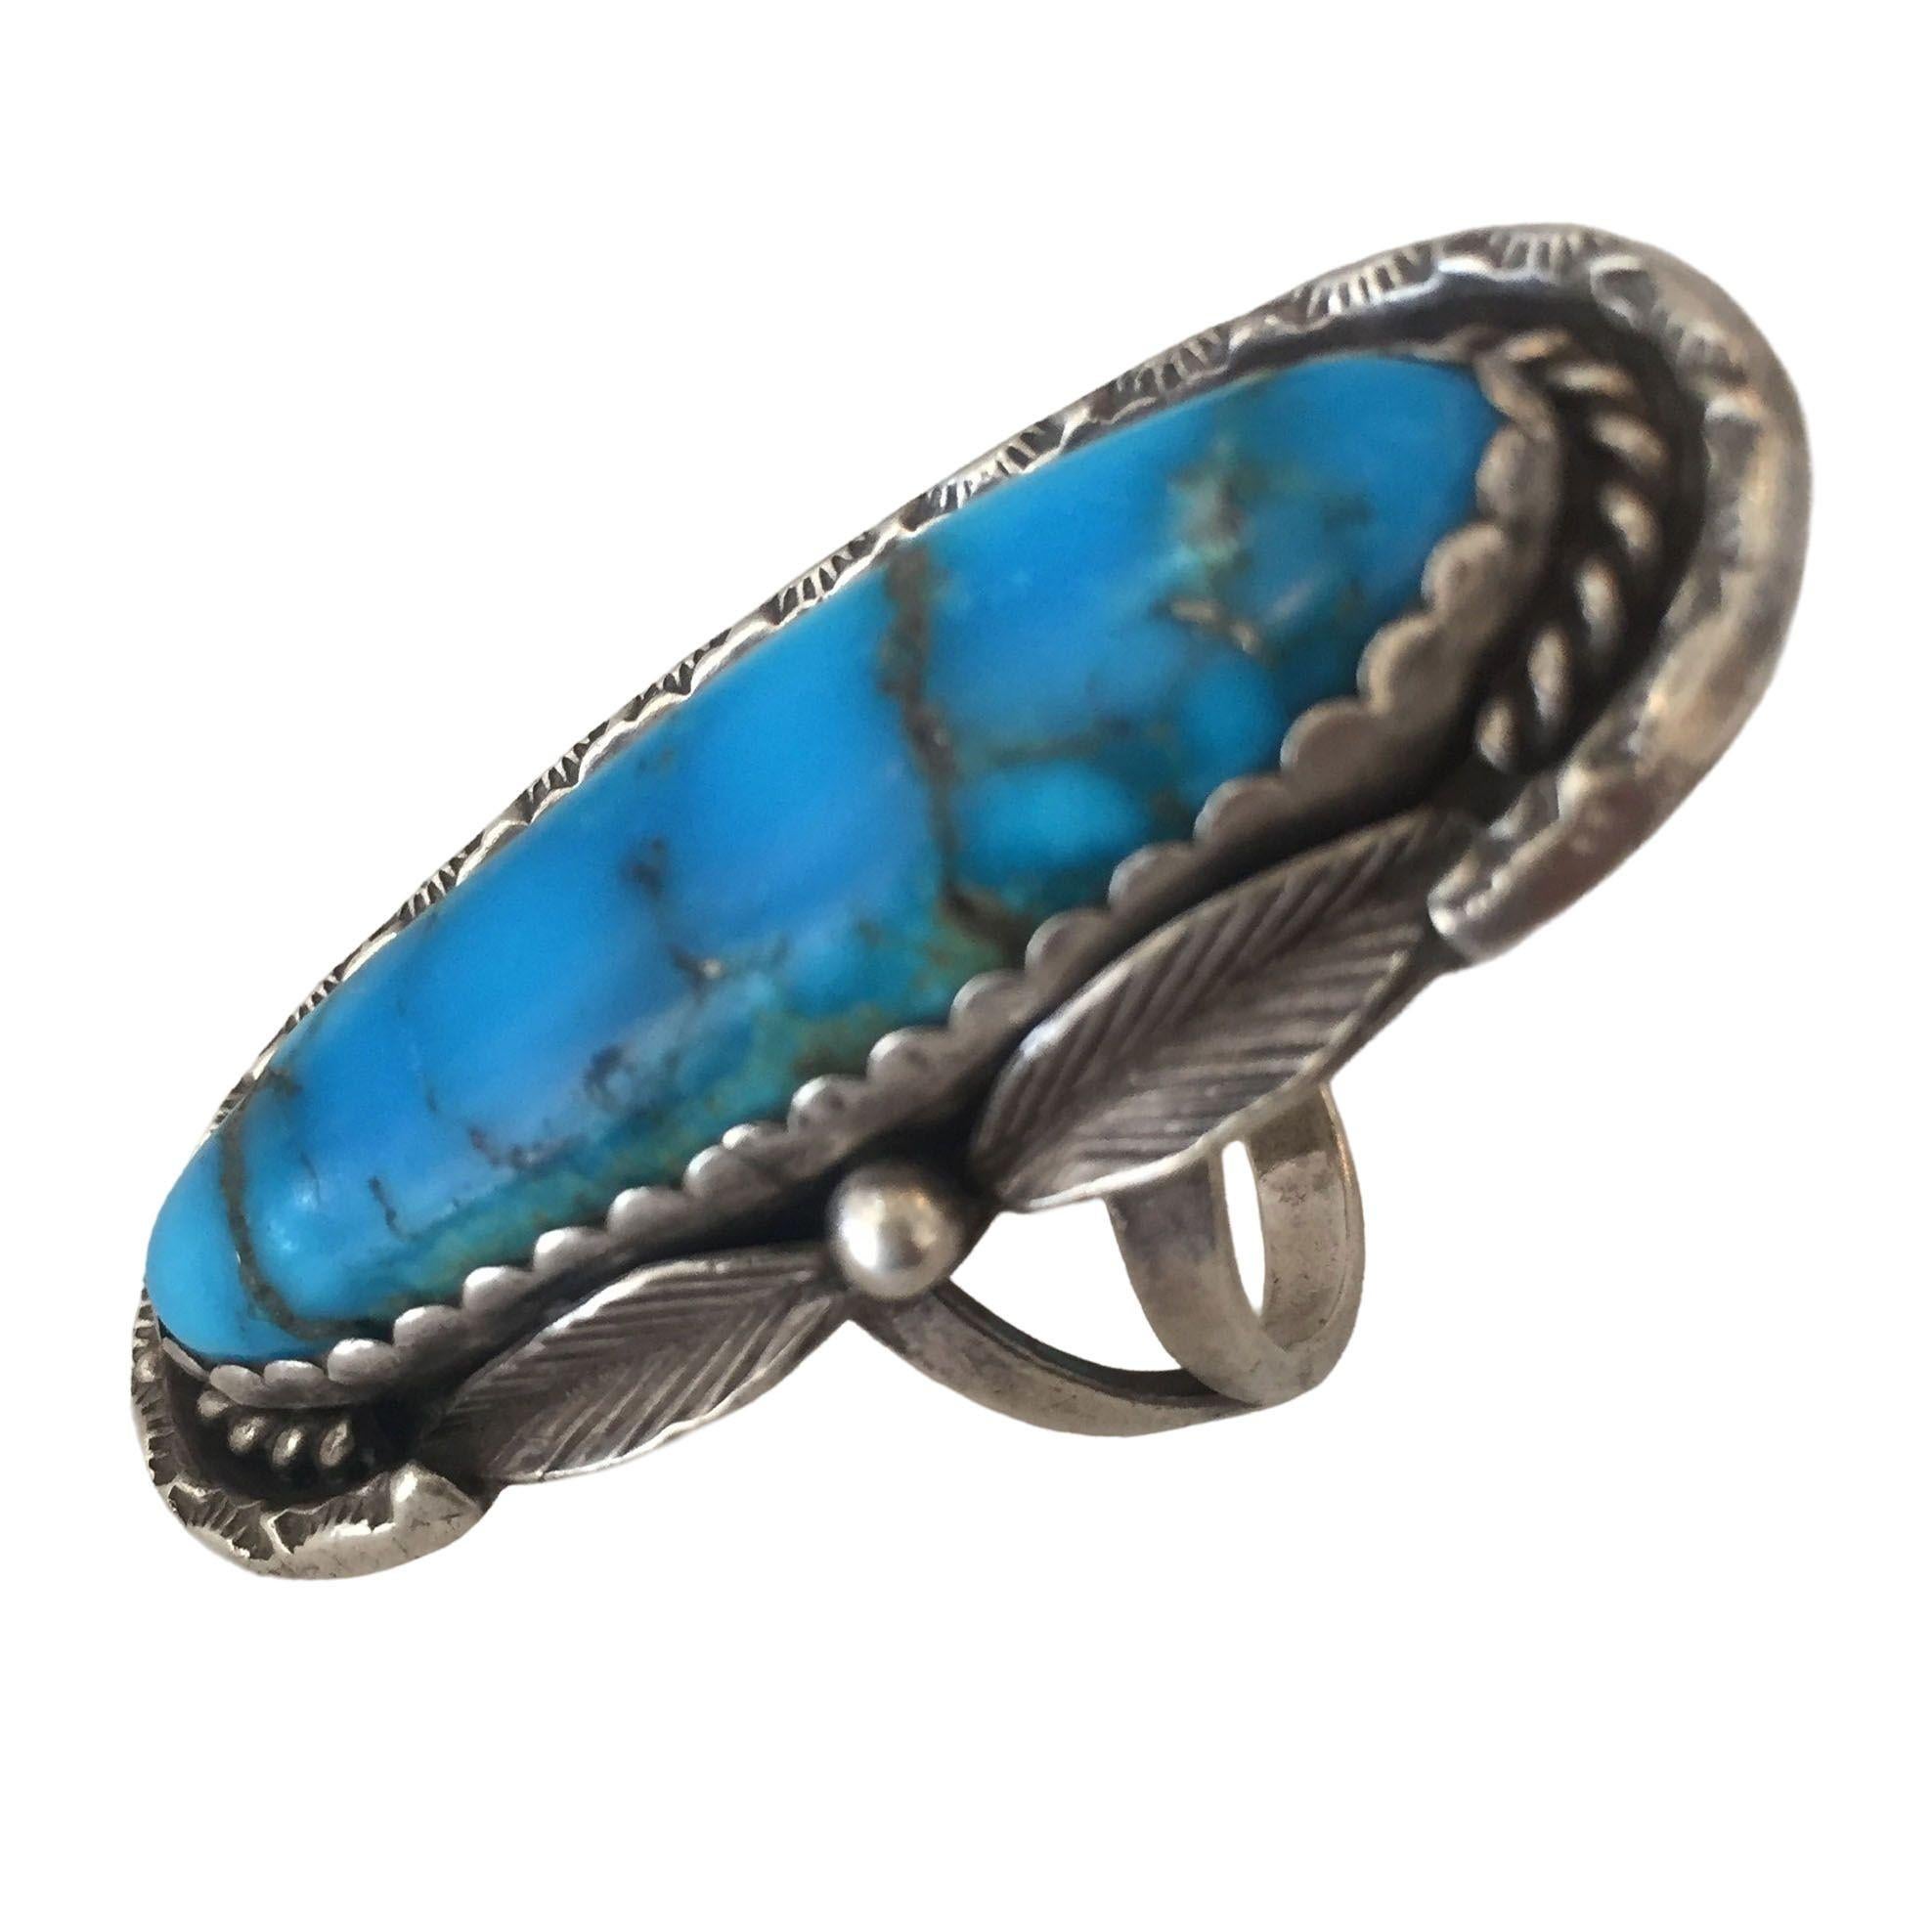 Vintage Southwest style bell trading post ring with a sterling silver band and a large turquoise stone.

Ring size 10.